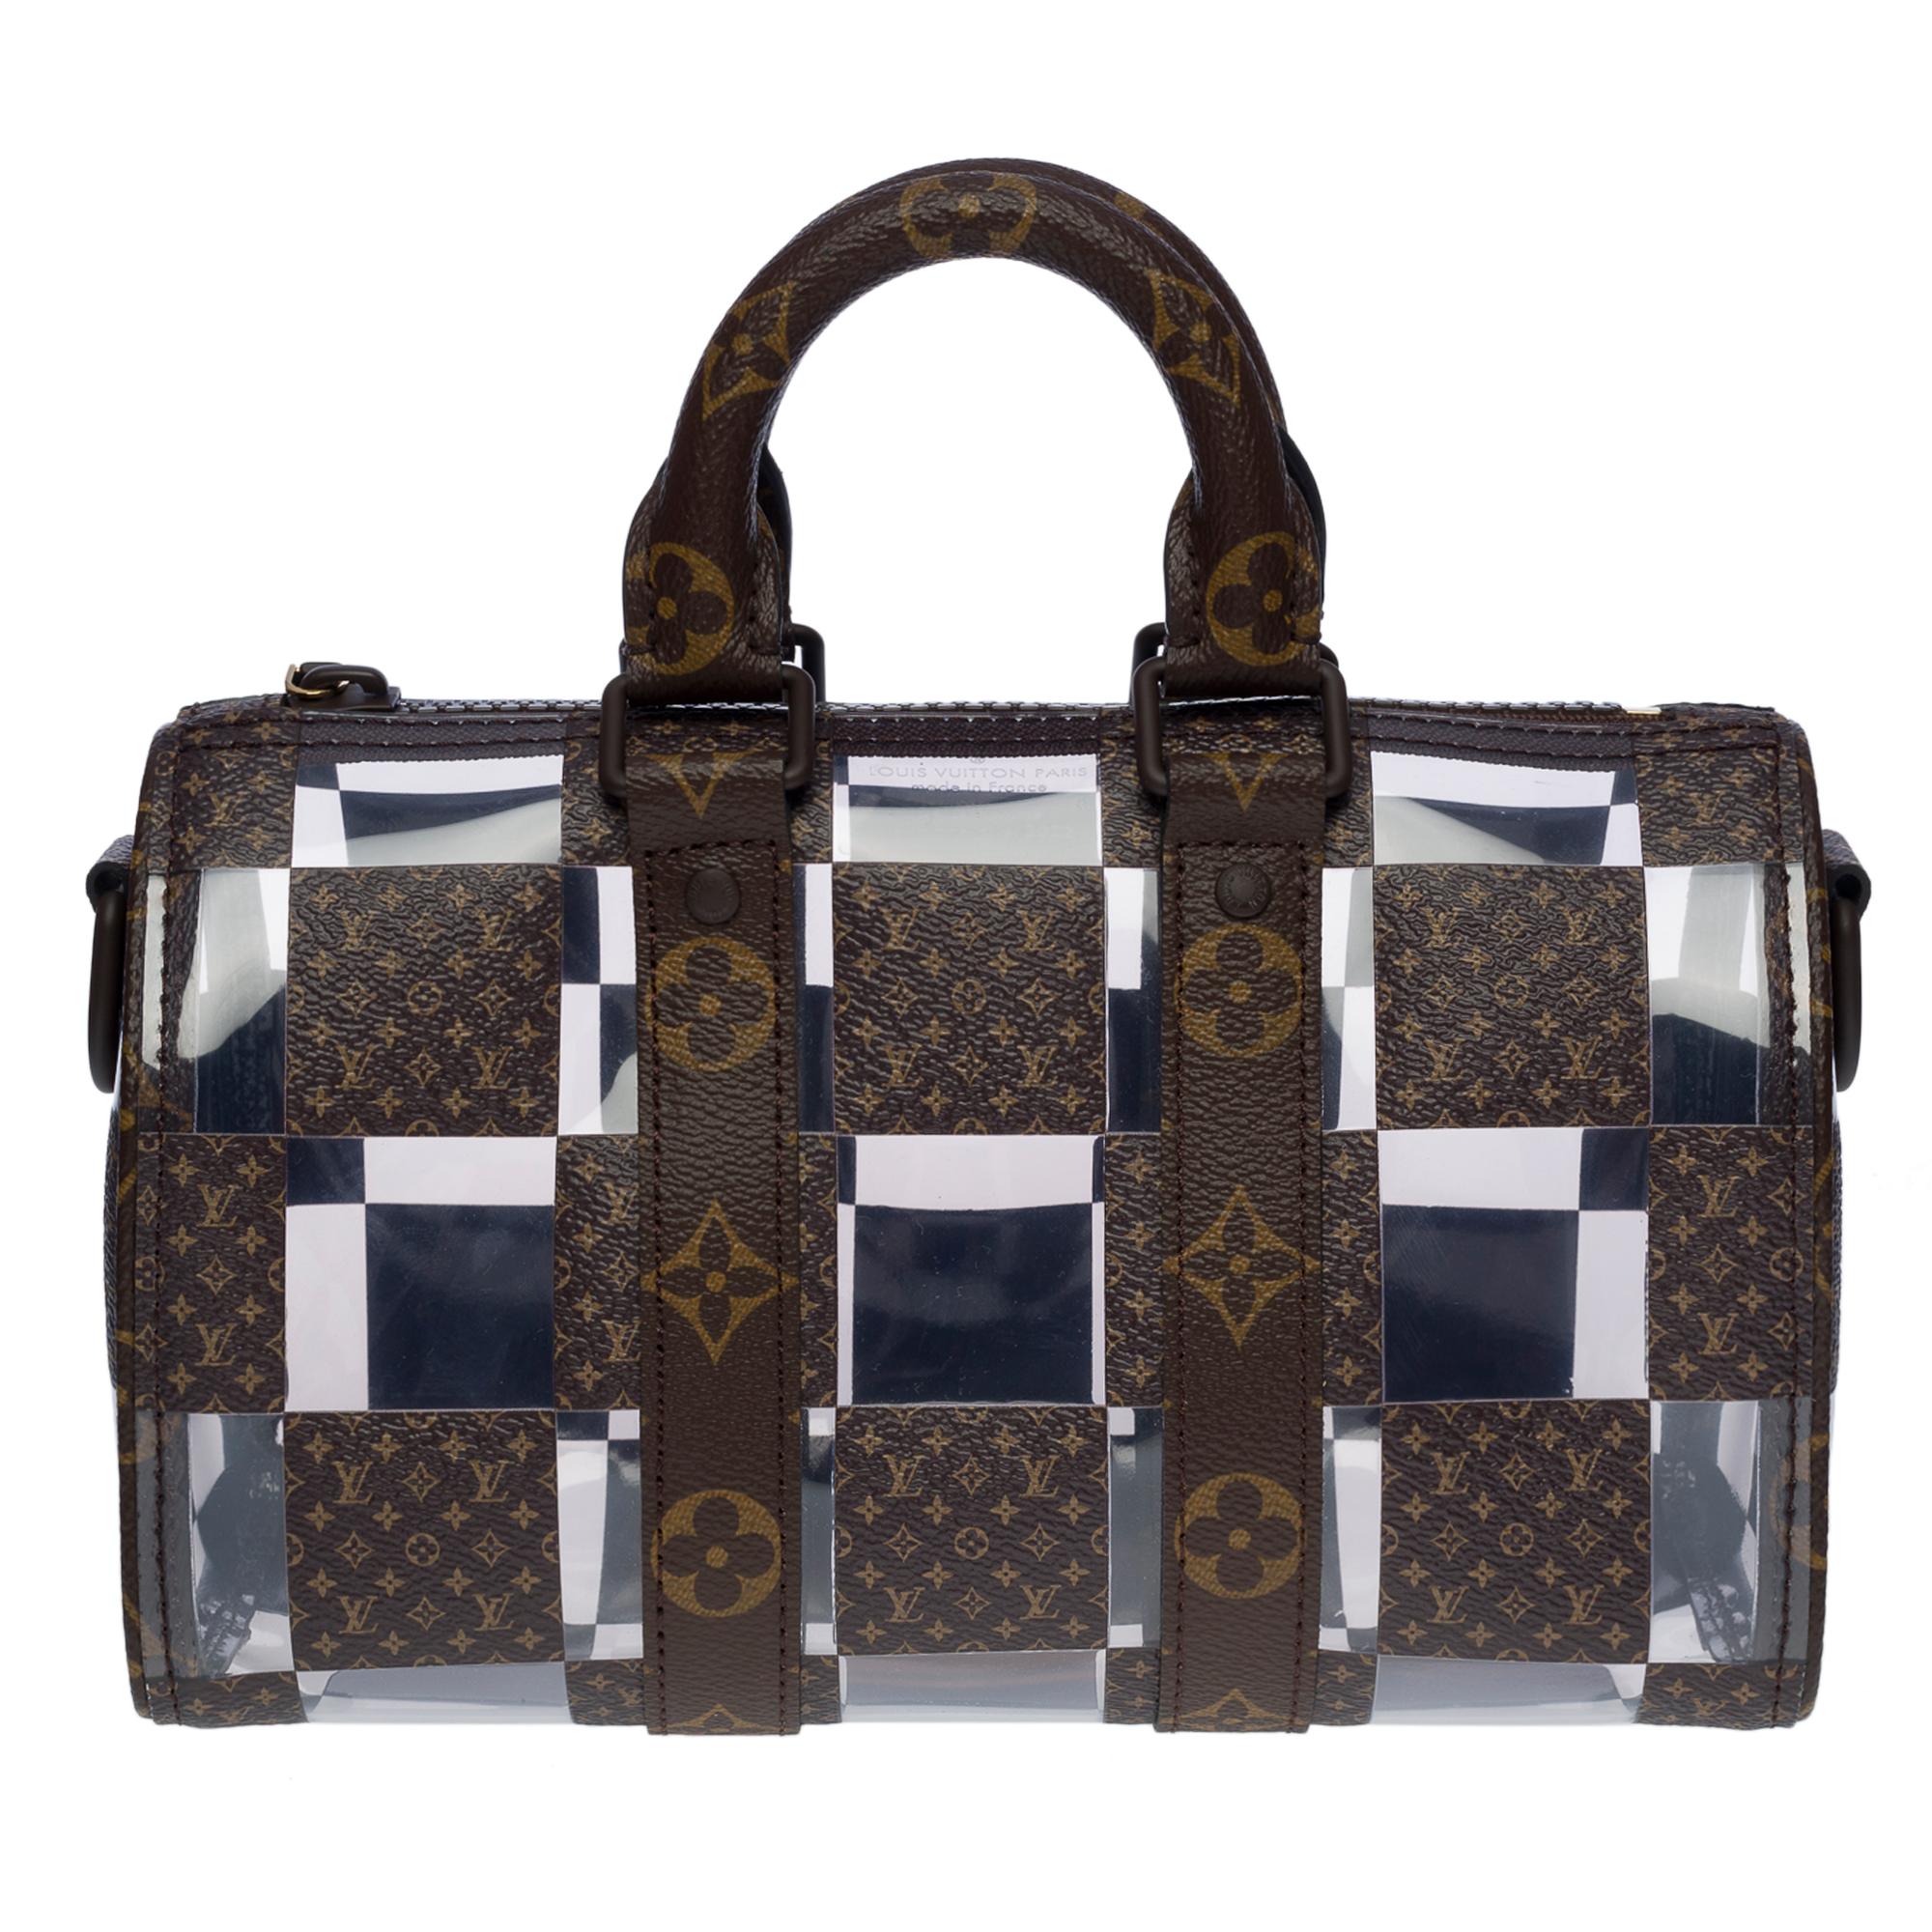 Louis Vuitton FW 2022 Monogram Chess Keepall Bandouliere 25 (Virgil Abloh Final Collection/Sold Out) Never Used W/Dust Cover and Box - This Keepall Bandouliere 25 is a rare find from the late designer Virgil Abloh's final Louis Vuitton collection,